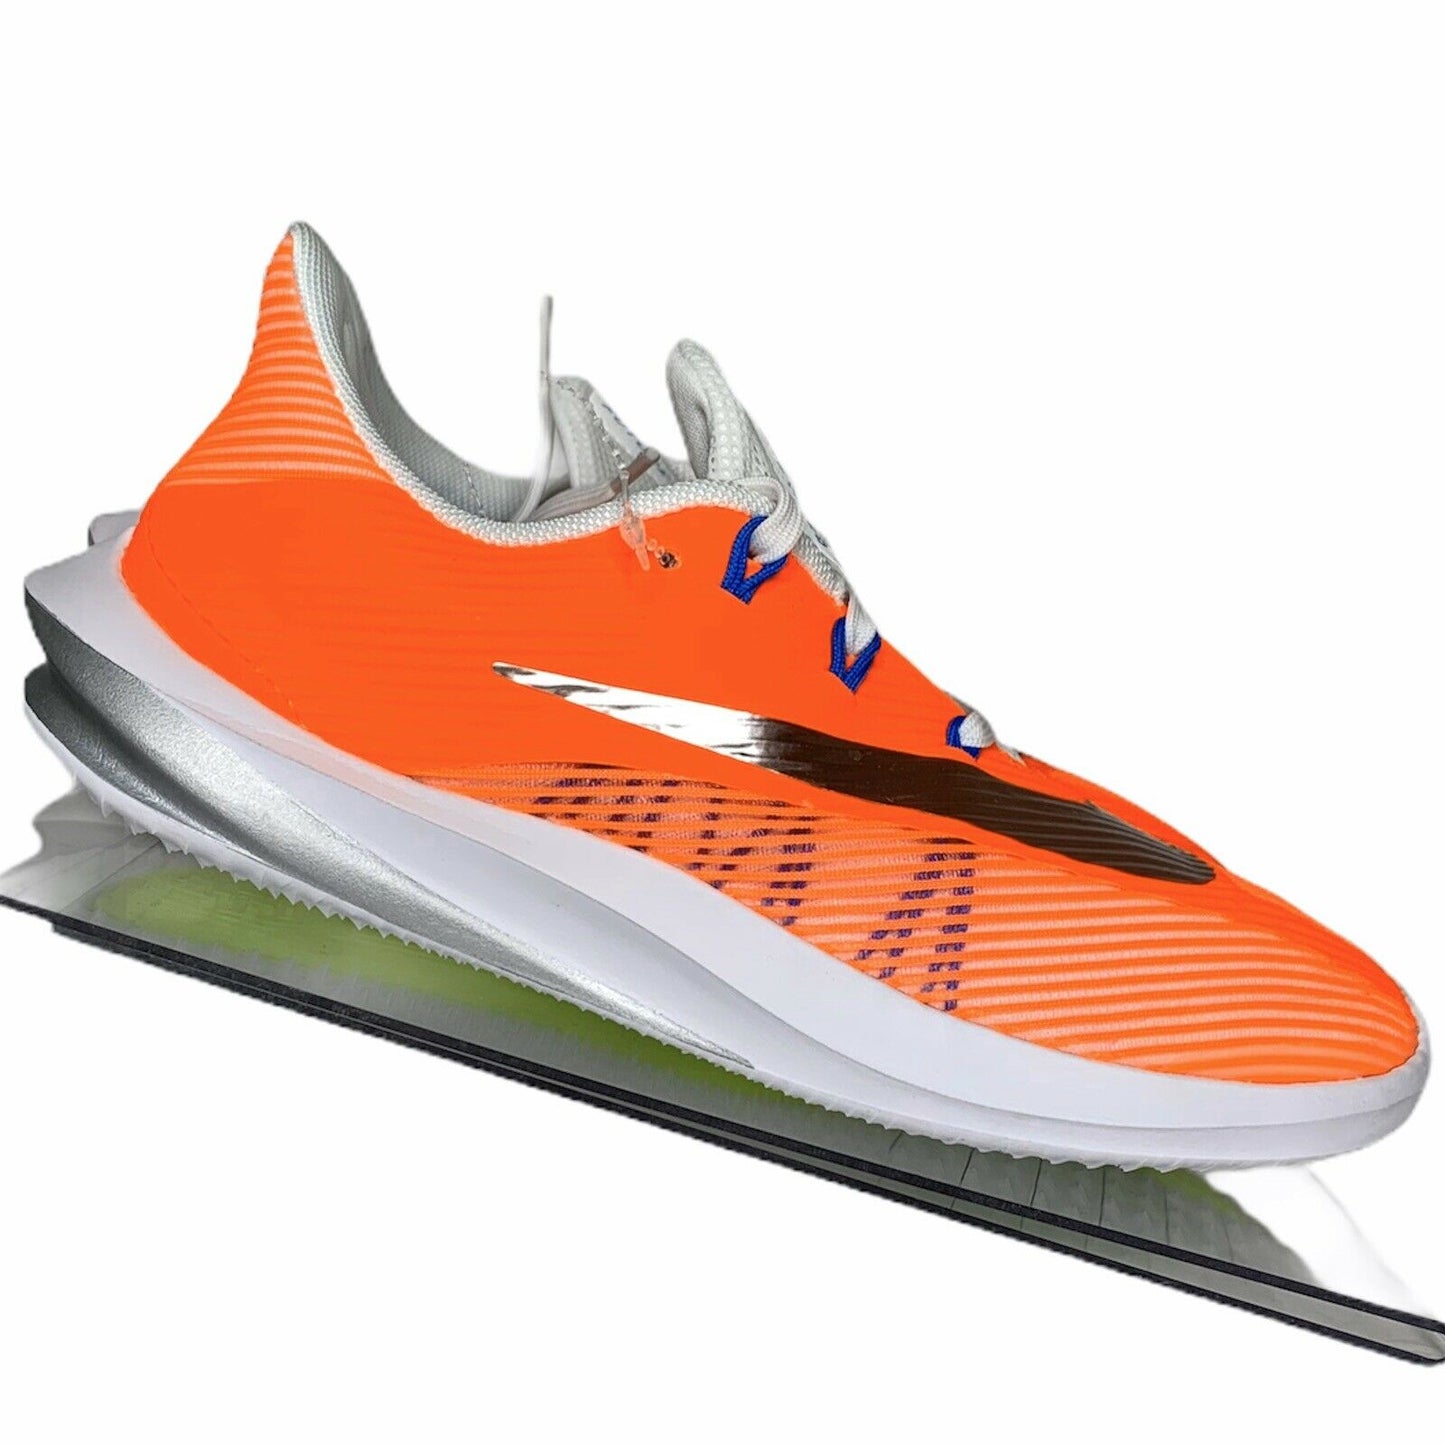 Nike Future Speed GS Orange Running Shoes Sneakers 6Y Kid Youth/ Girls. - Fannetti Boutique